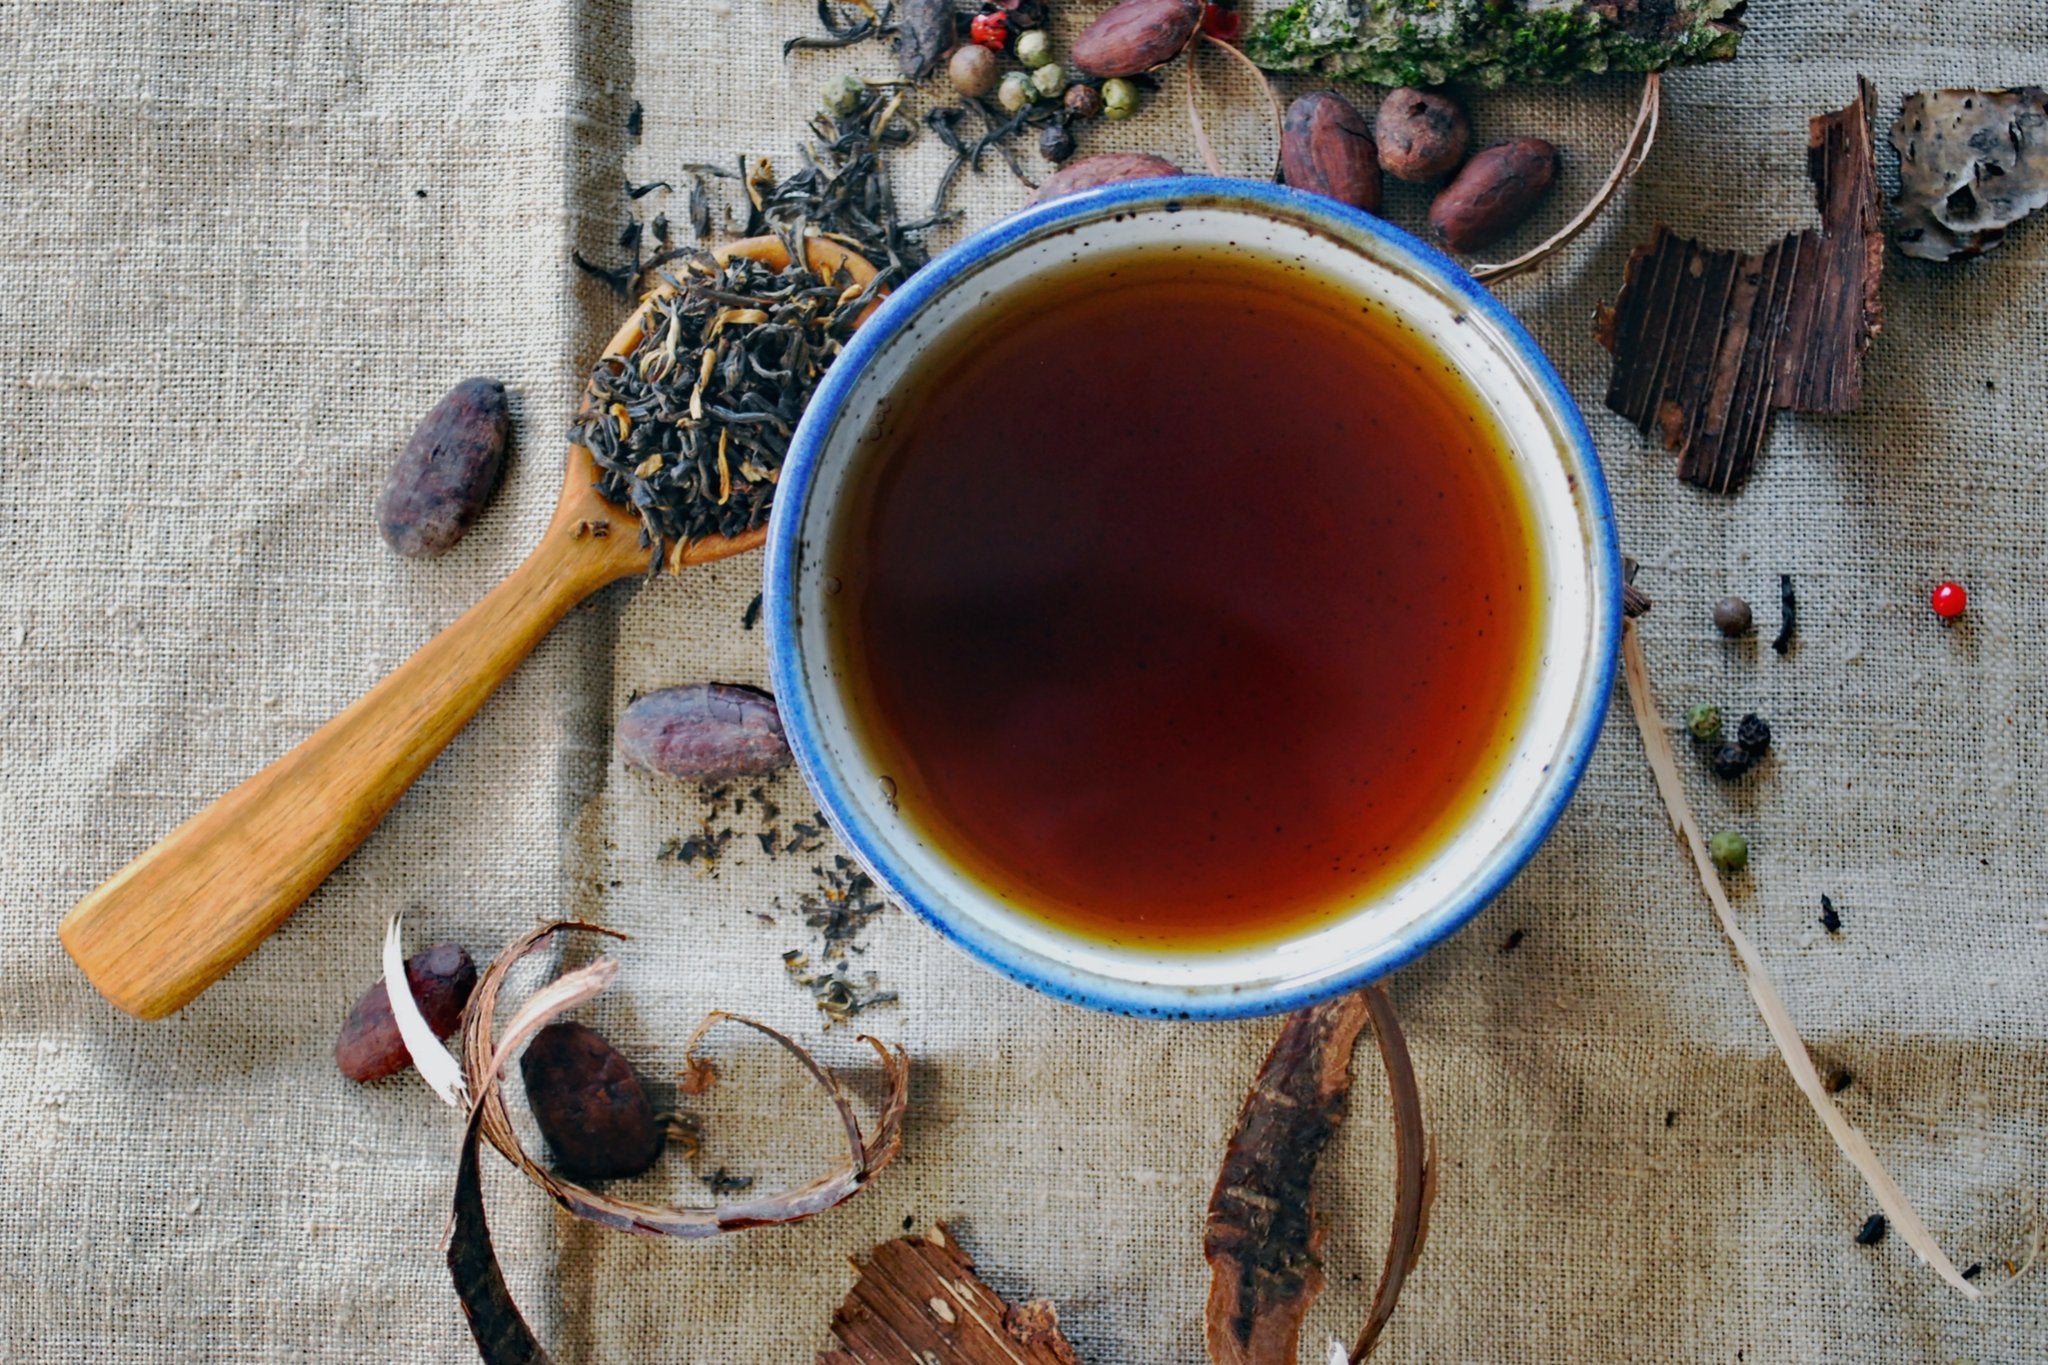 Does Drinking Tea Improve Brain Health? Your Guide To The Best Tea (And Food) For Optimal Brain Function - Loose Leaf Tea Market